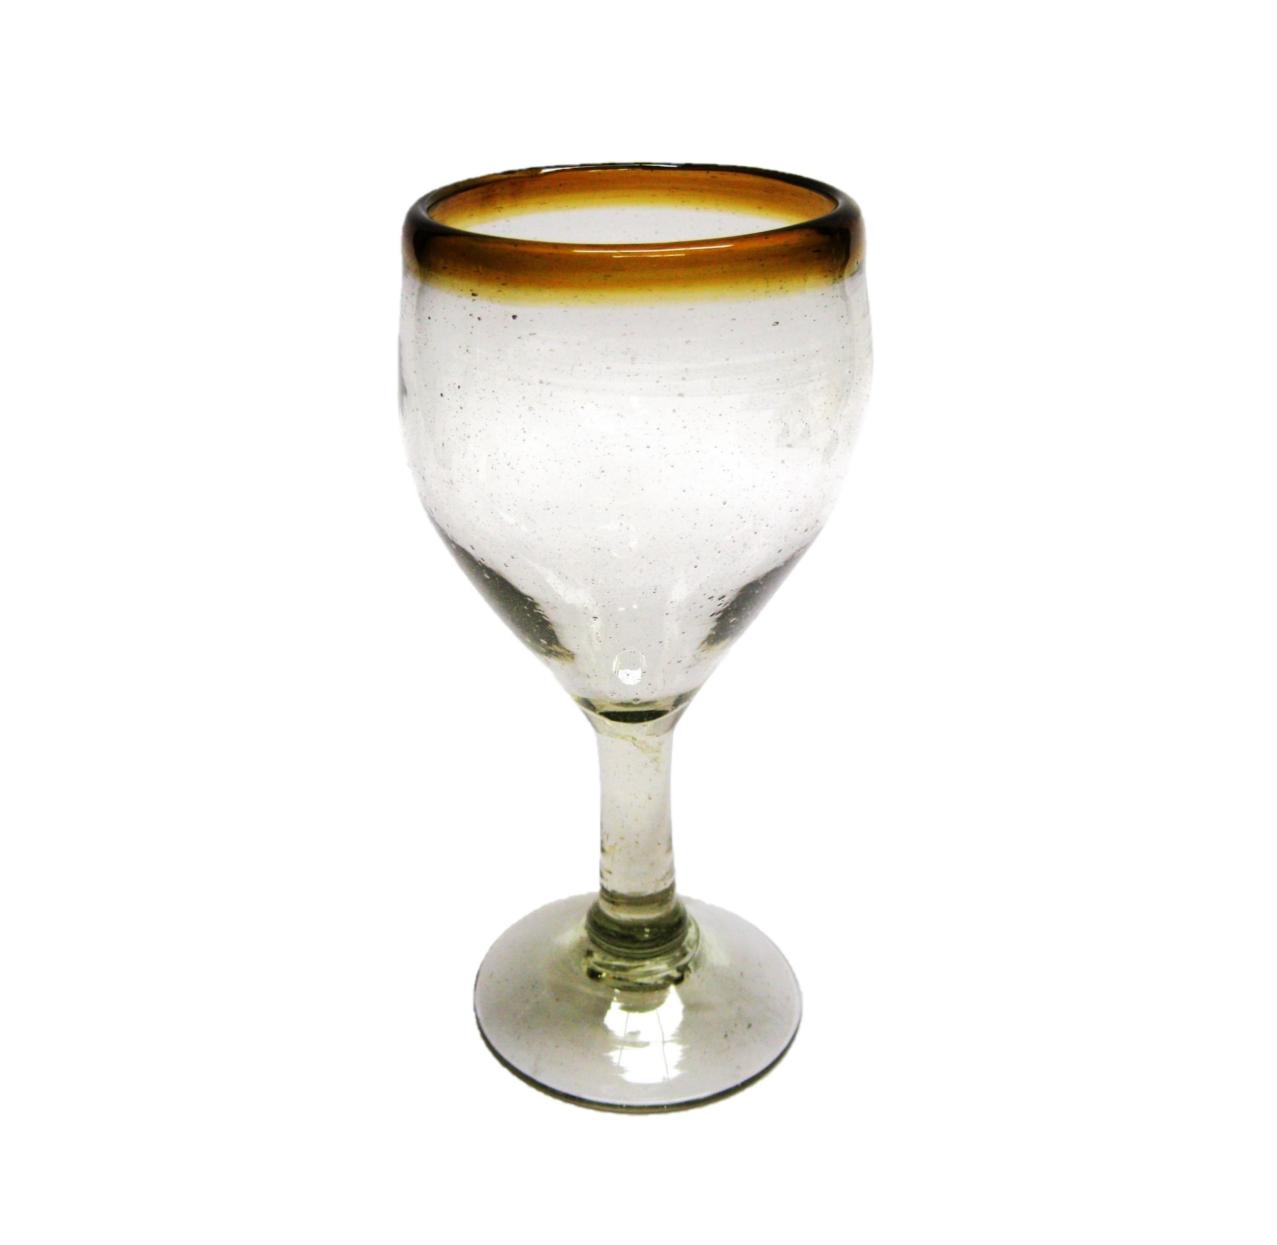 Amber Rim Glassware / Amber Rim 7 oz Small Wine Glasses (set of 6) / Capture the bouquet of fine red wine with these wine glasses bordered with a bright, amber color rim.